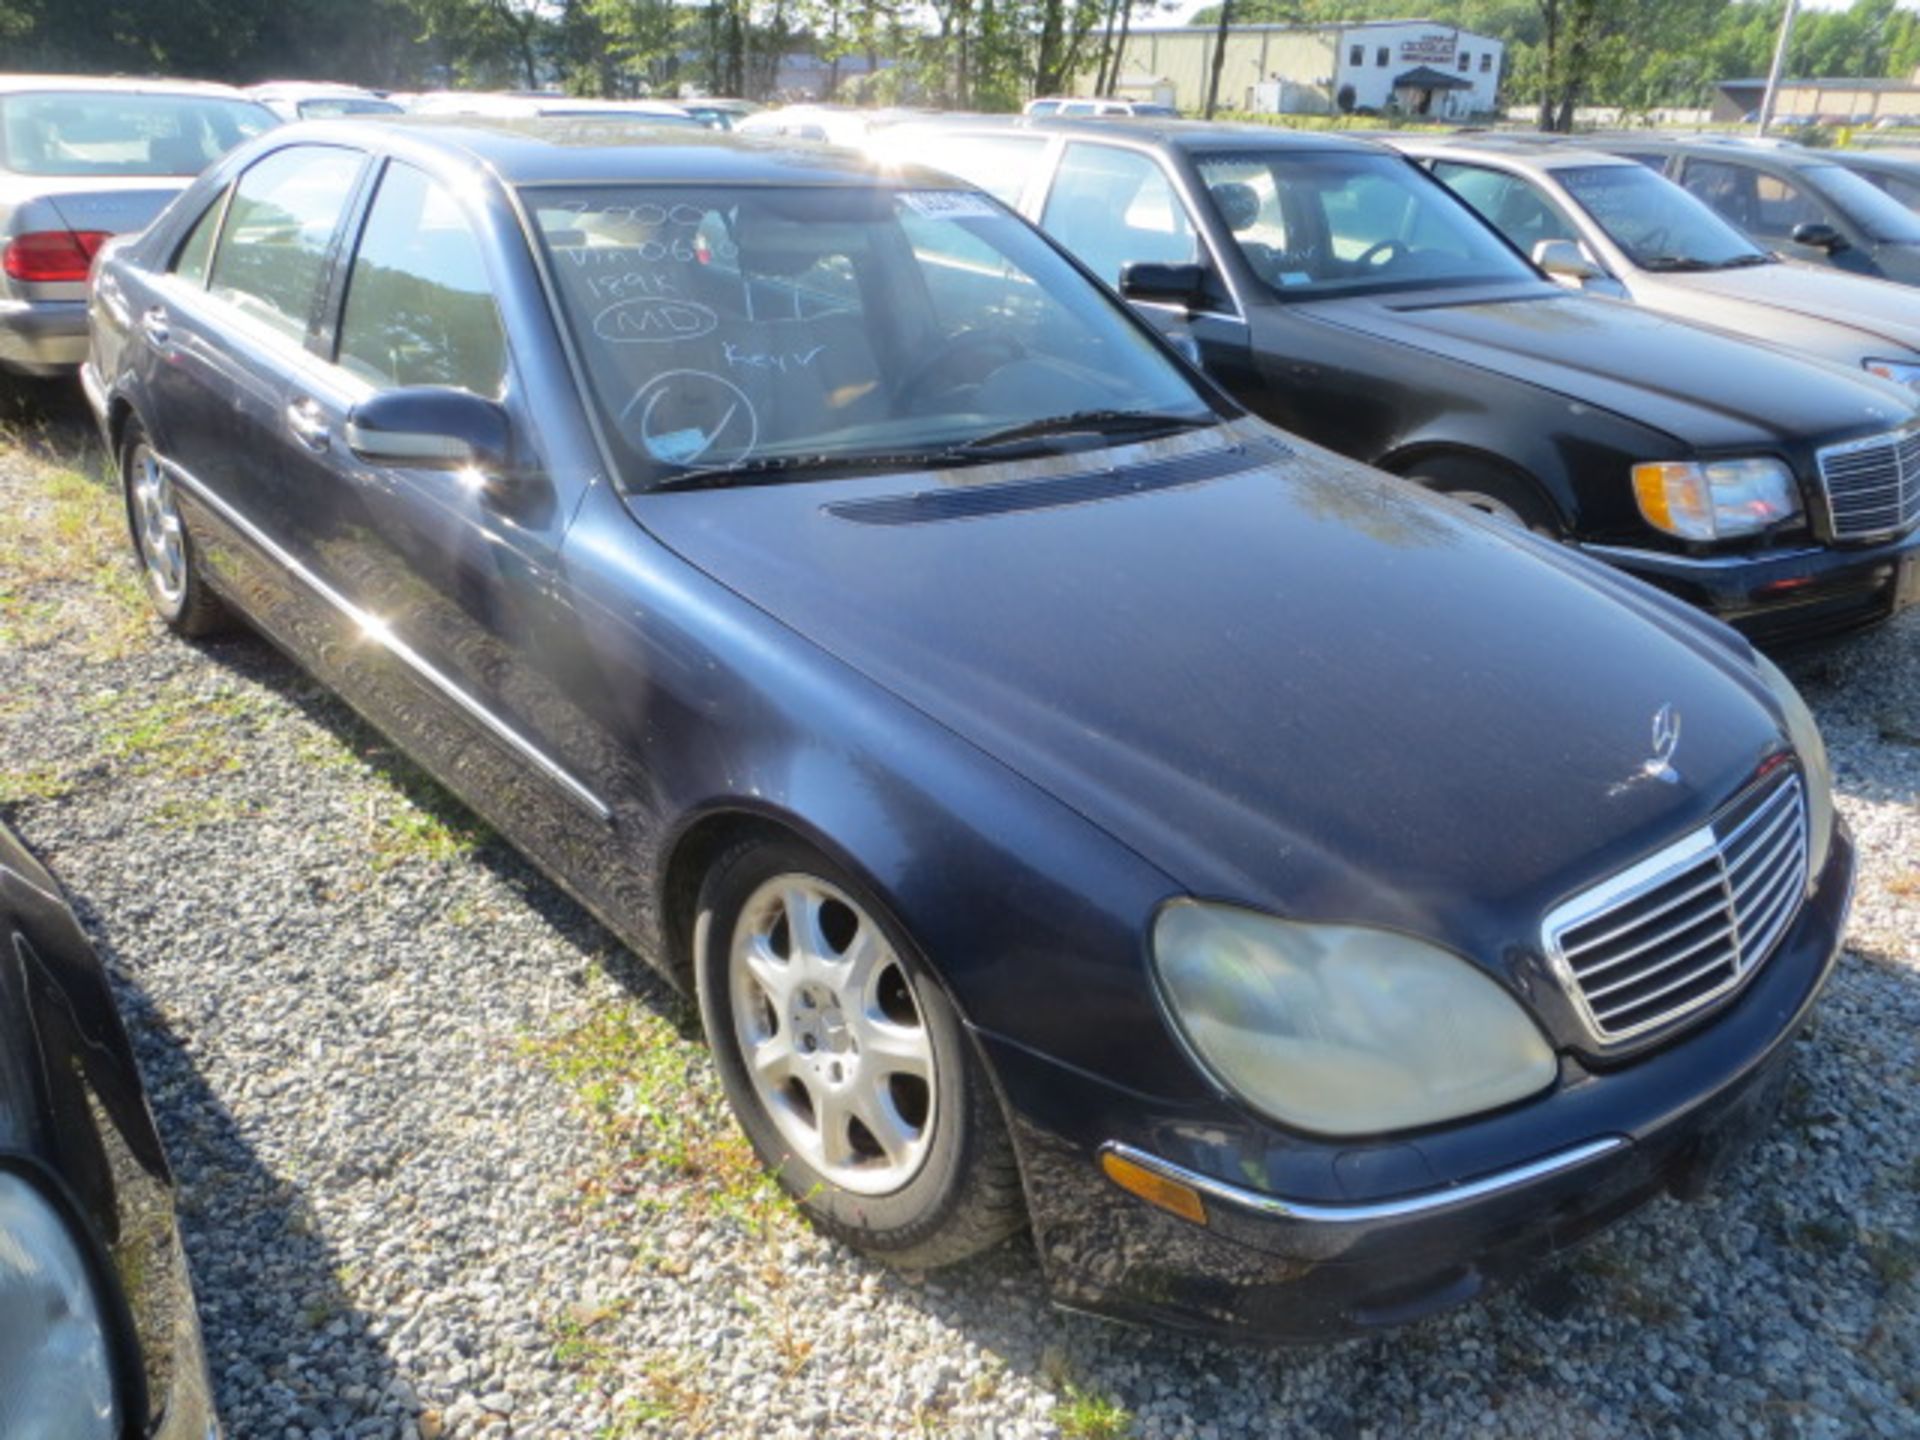 2000 Mercedes Benz S430 189000 MILES,VIN WDBNG70J0YA070640, SOLD WITH GOOD TRANSFERABLE TITLE, ALL